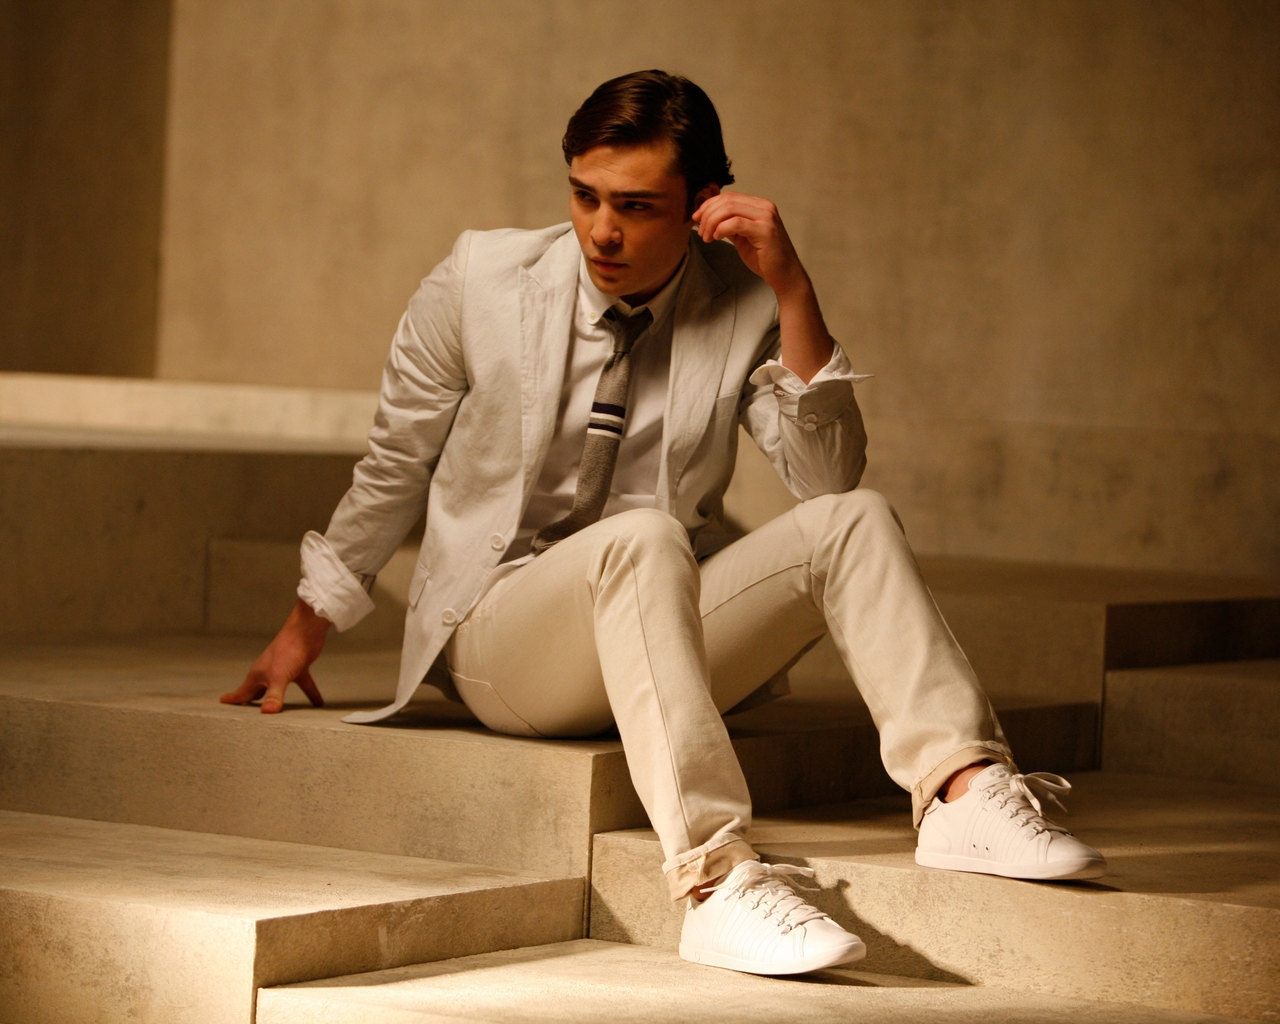 Ed Westwick for 1280 x 1024 resolution